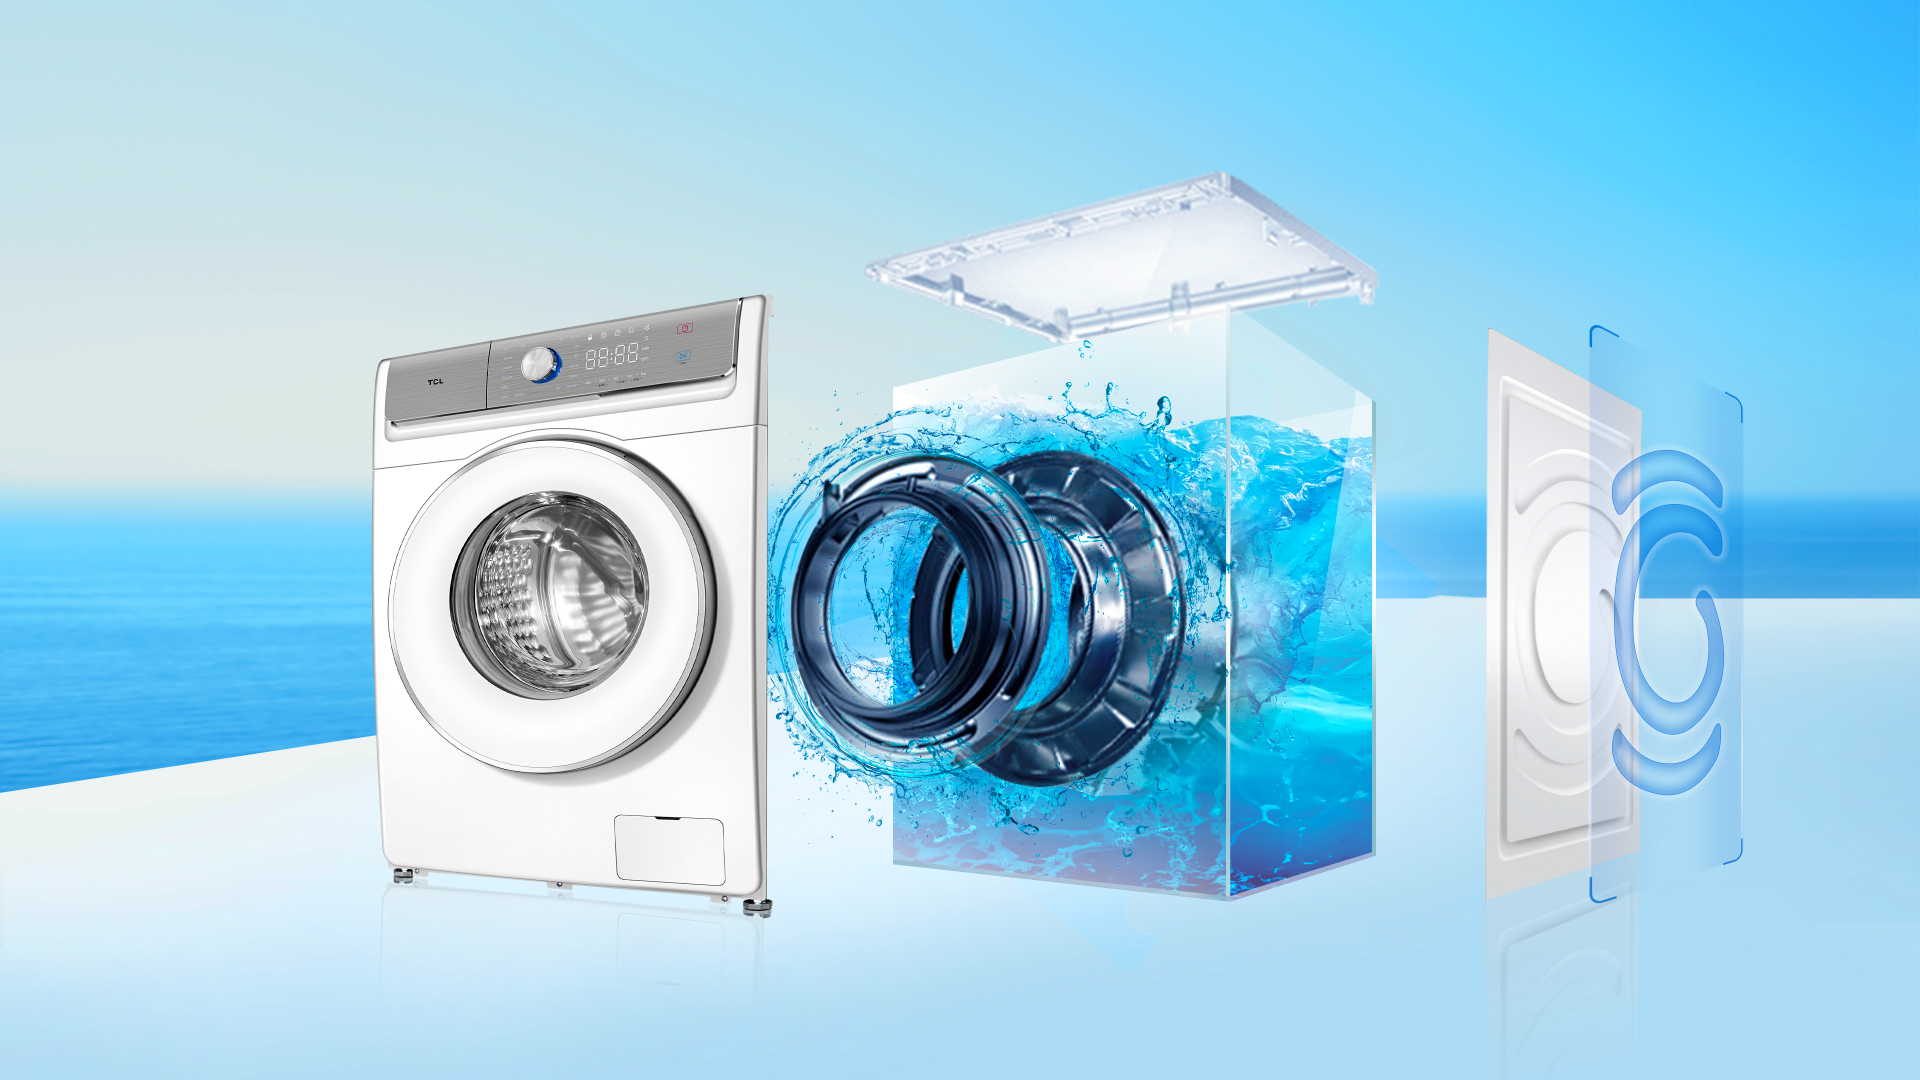 TCL washing machine FP0924WC0 features